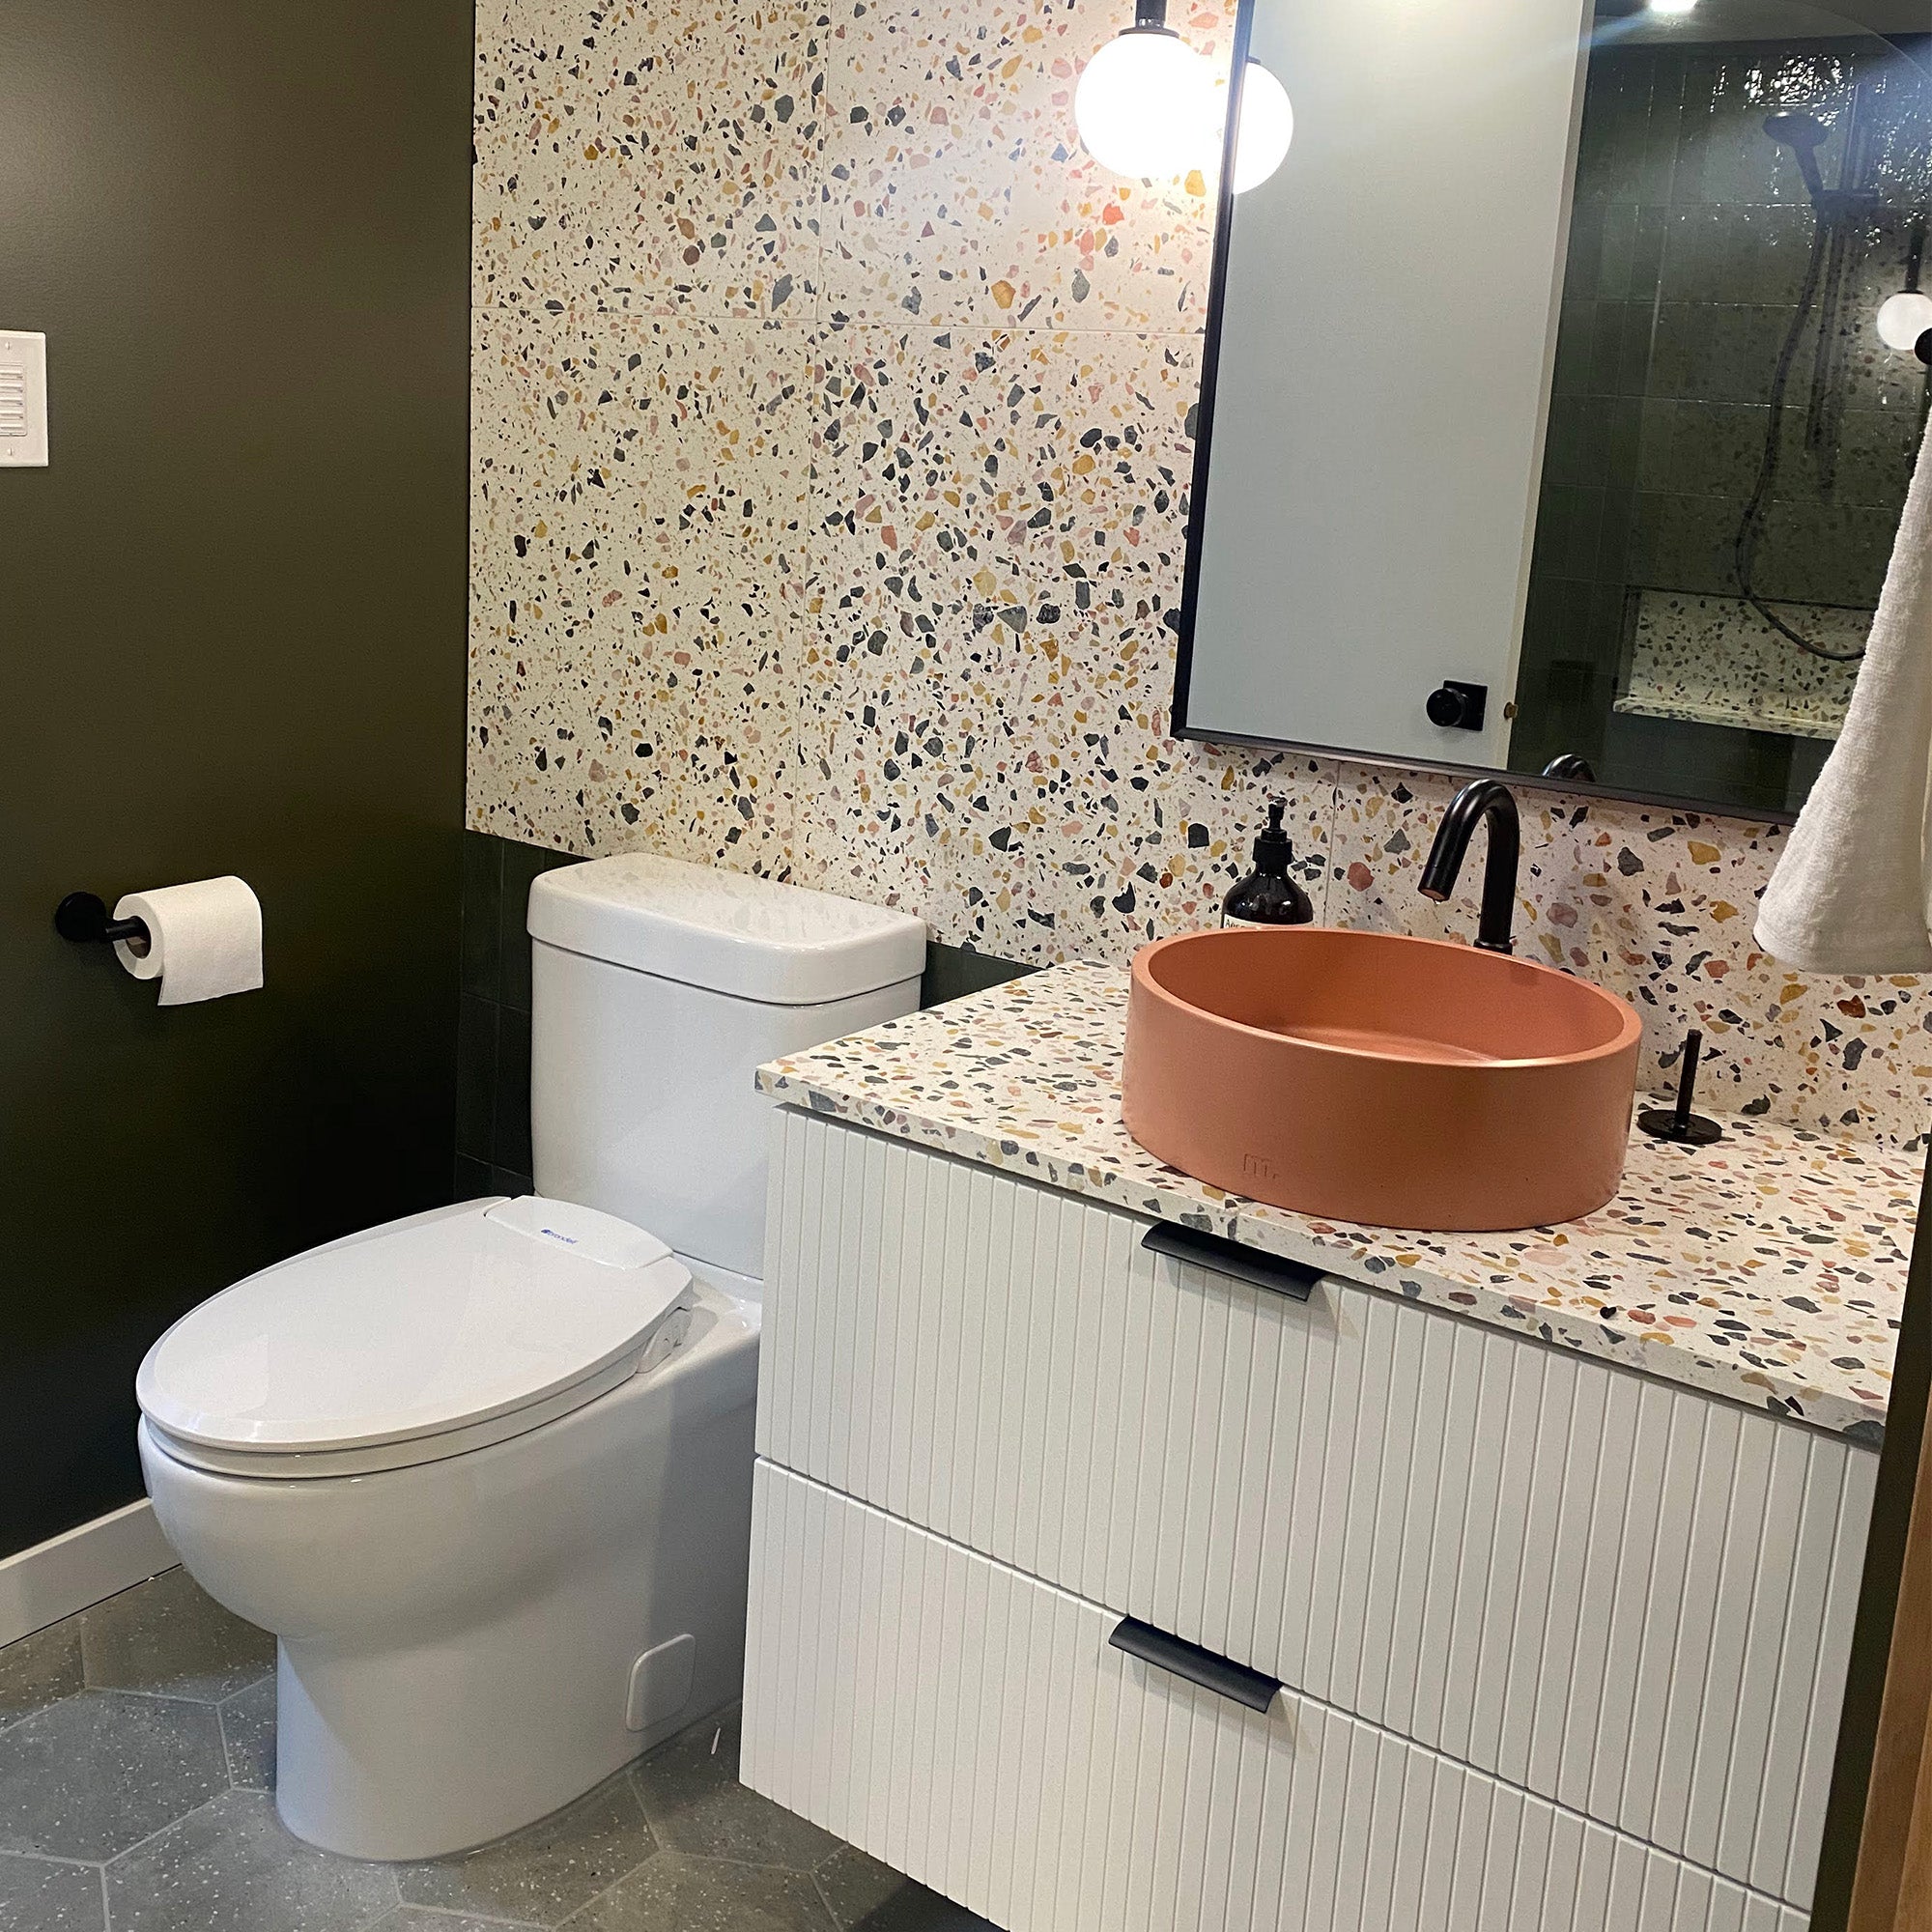 Modern bathroom with a round terra cotta colored sink and cream counters with black and orange specks.